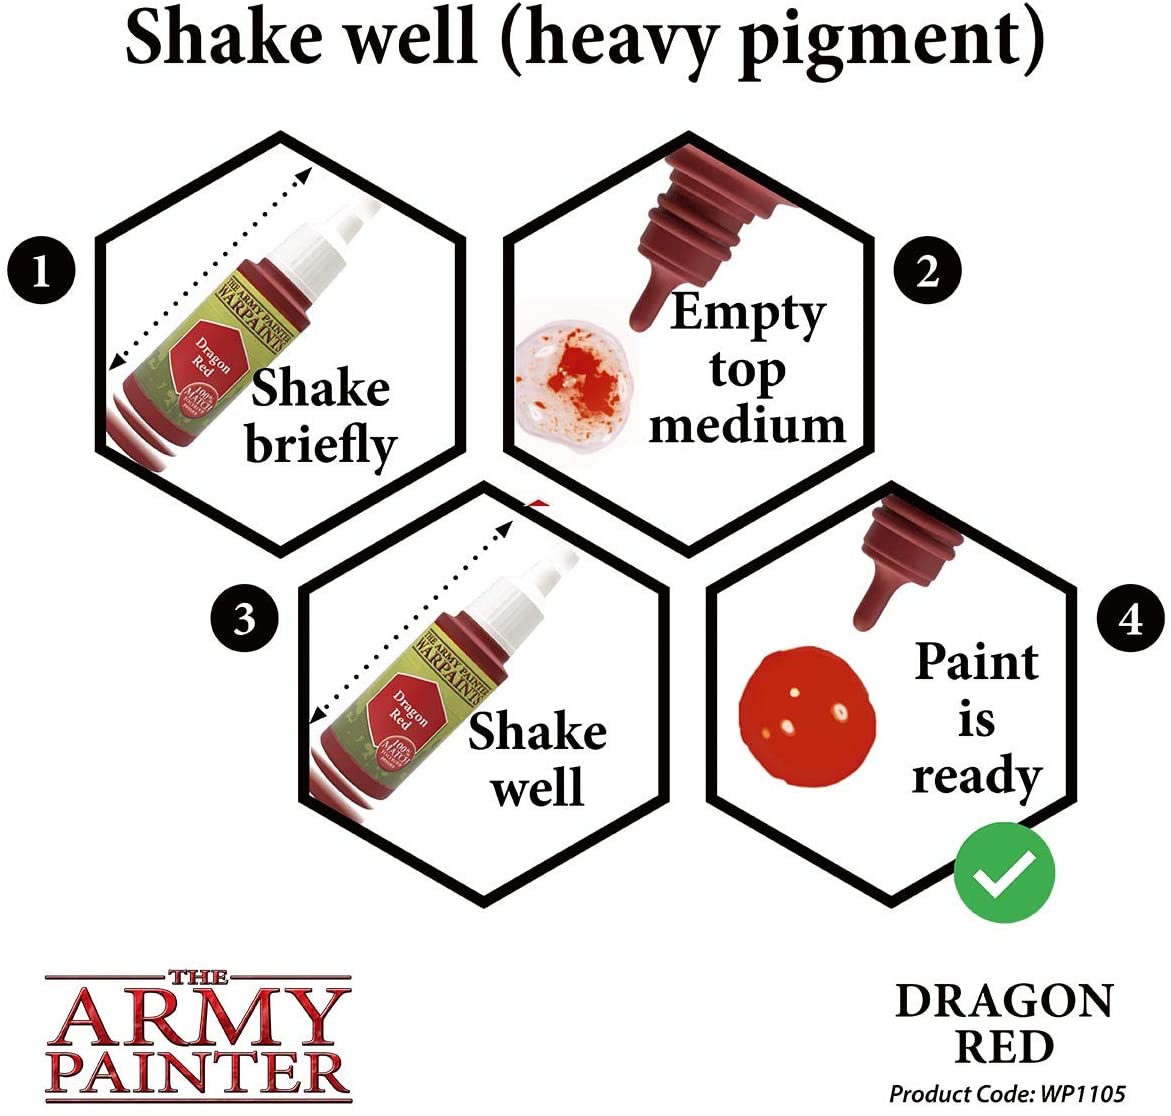 The Army Painter - Warpaints: Dragon Red (18ml/0.6oz)